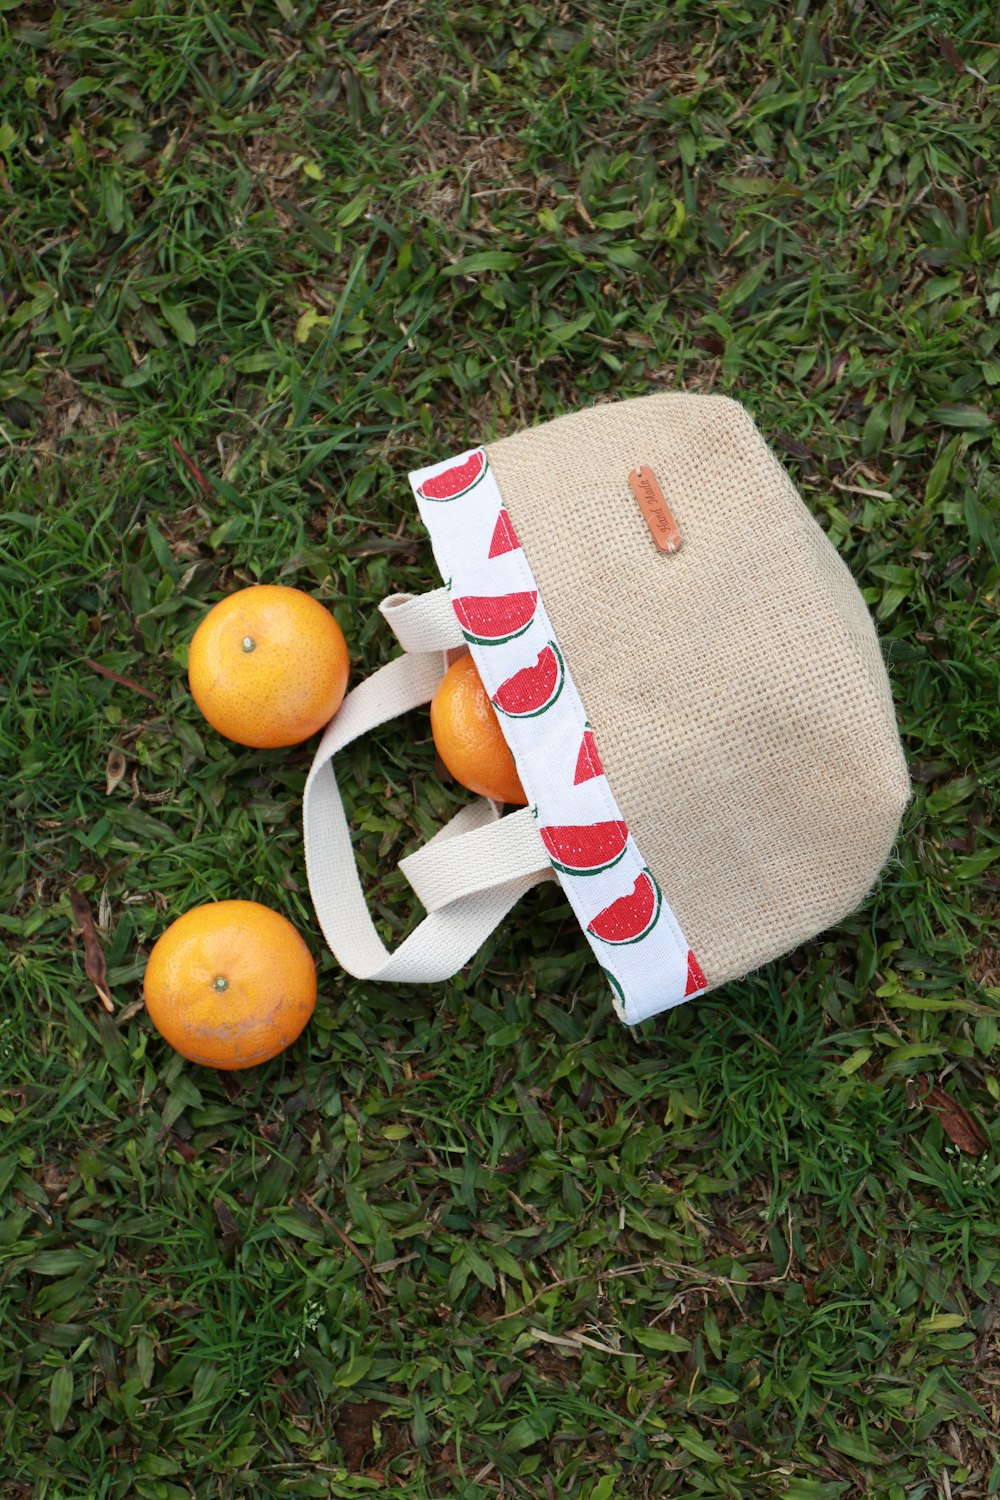 two oranges and a bag on the grass